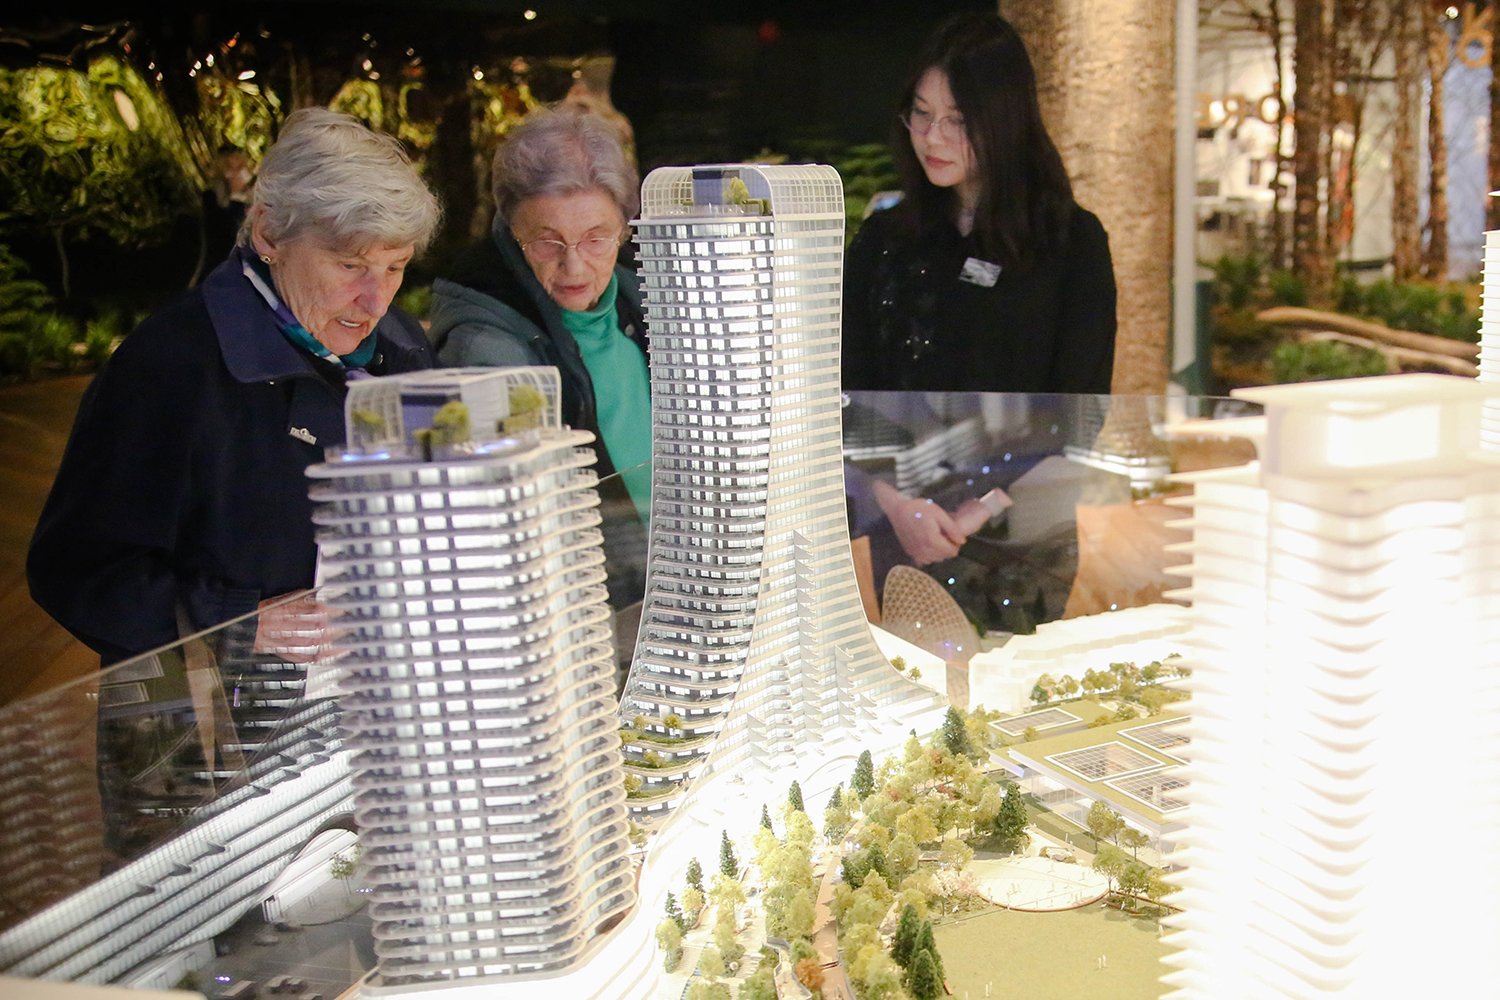 Two elderly women chat in front of a glowing architectural model of a large development’s curvy towers.